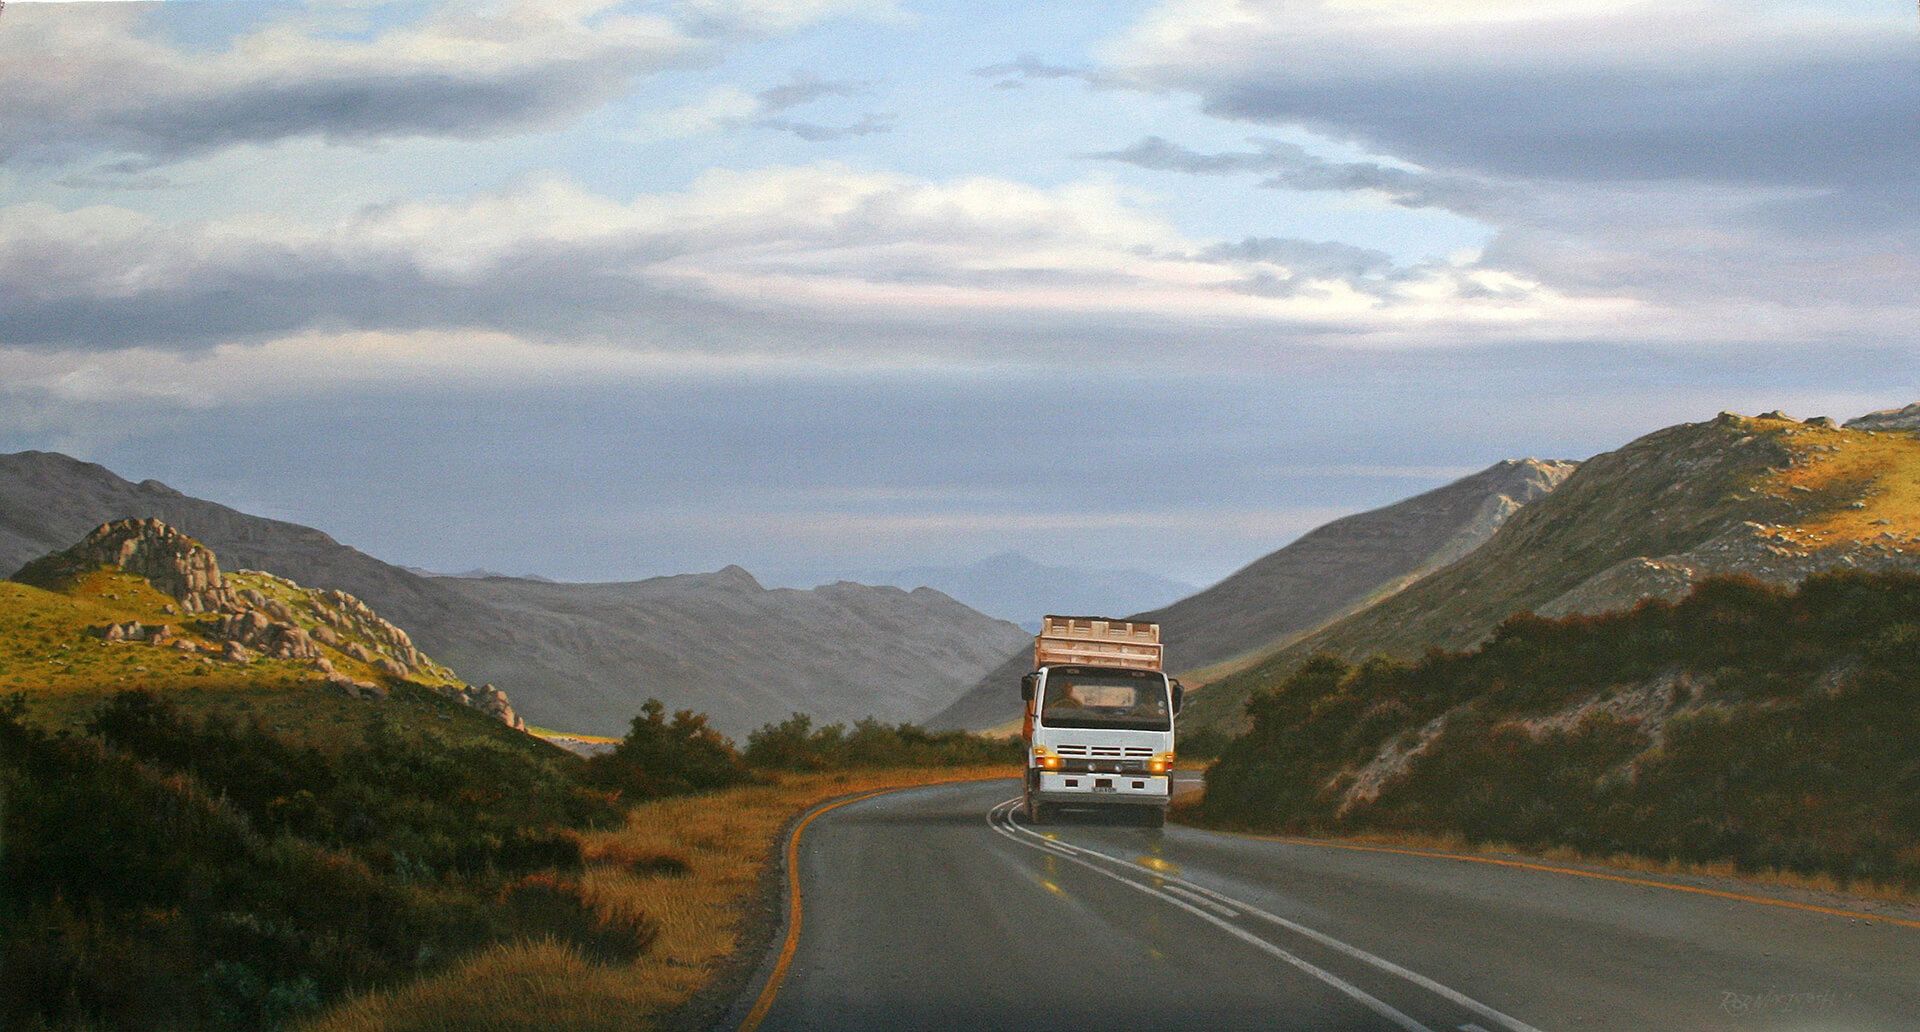 Photorealistic painting of truck driving on a highway through hills